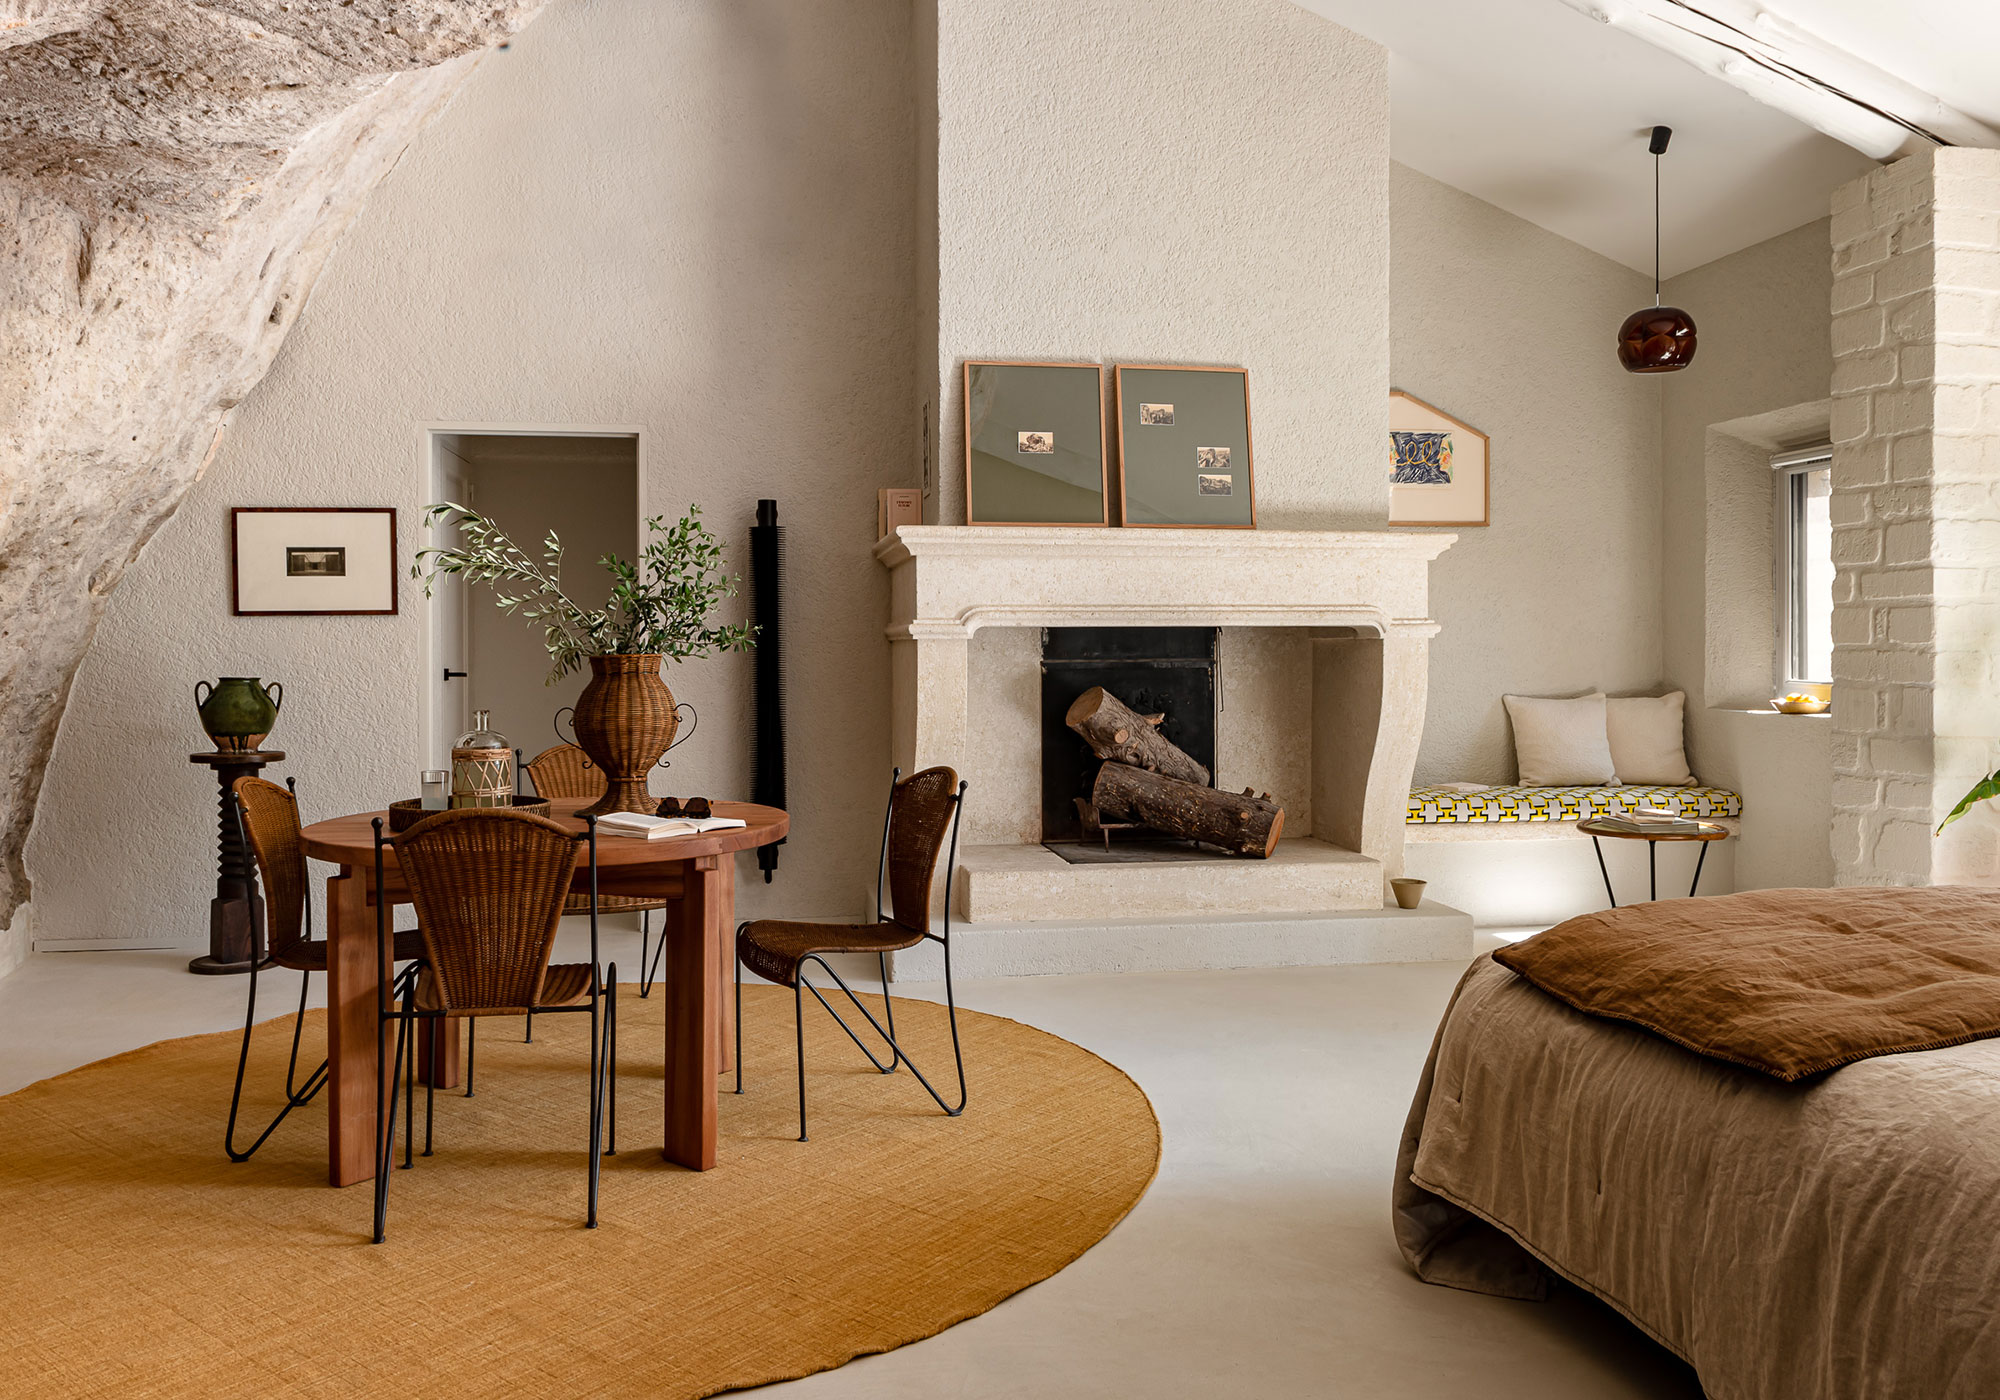 A Look Inside this Designer Villa in Provence